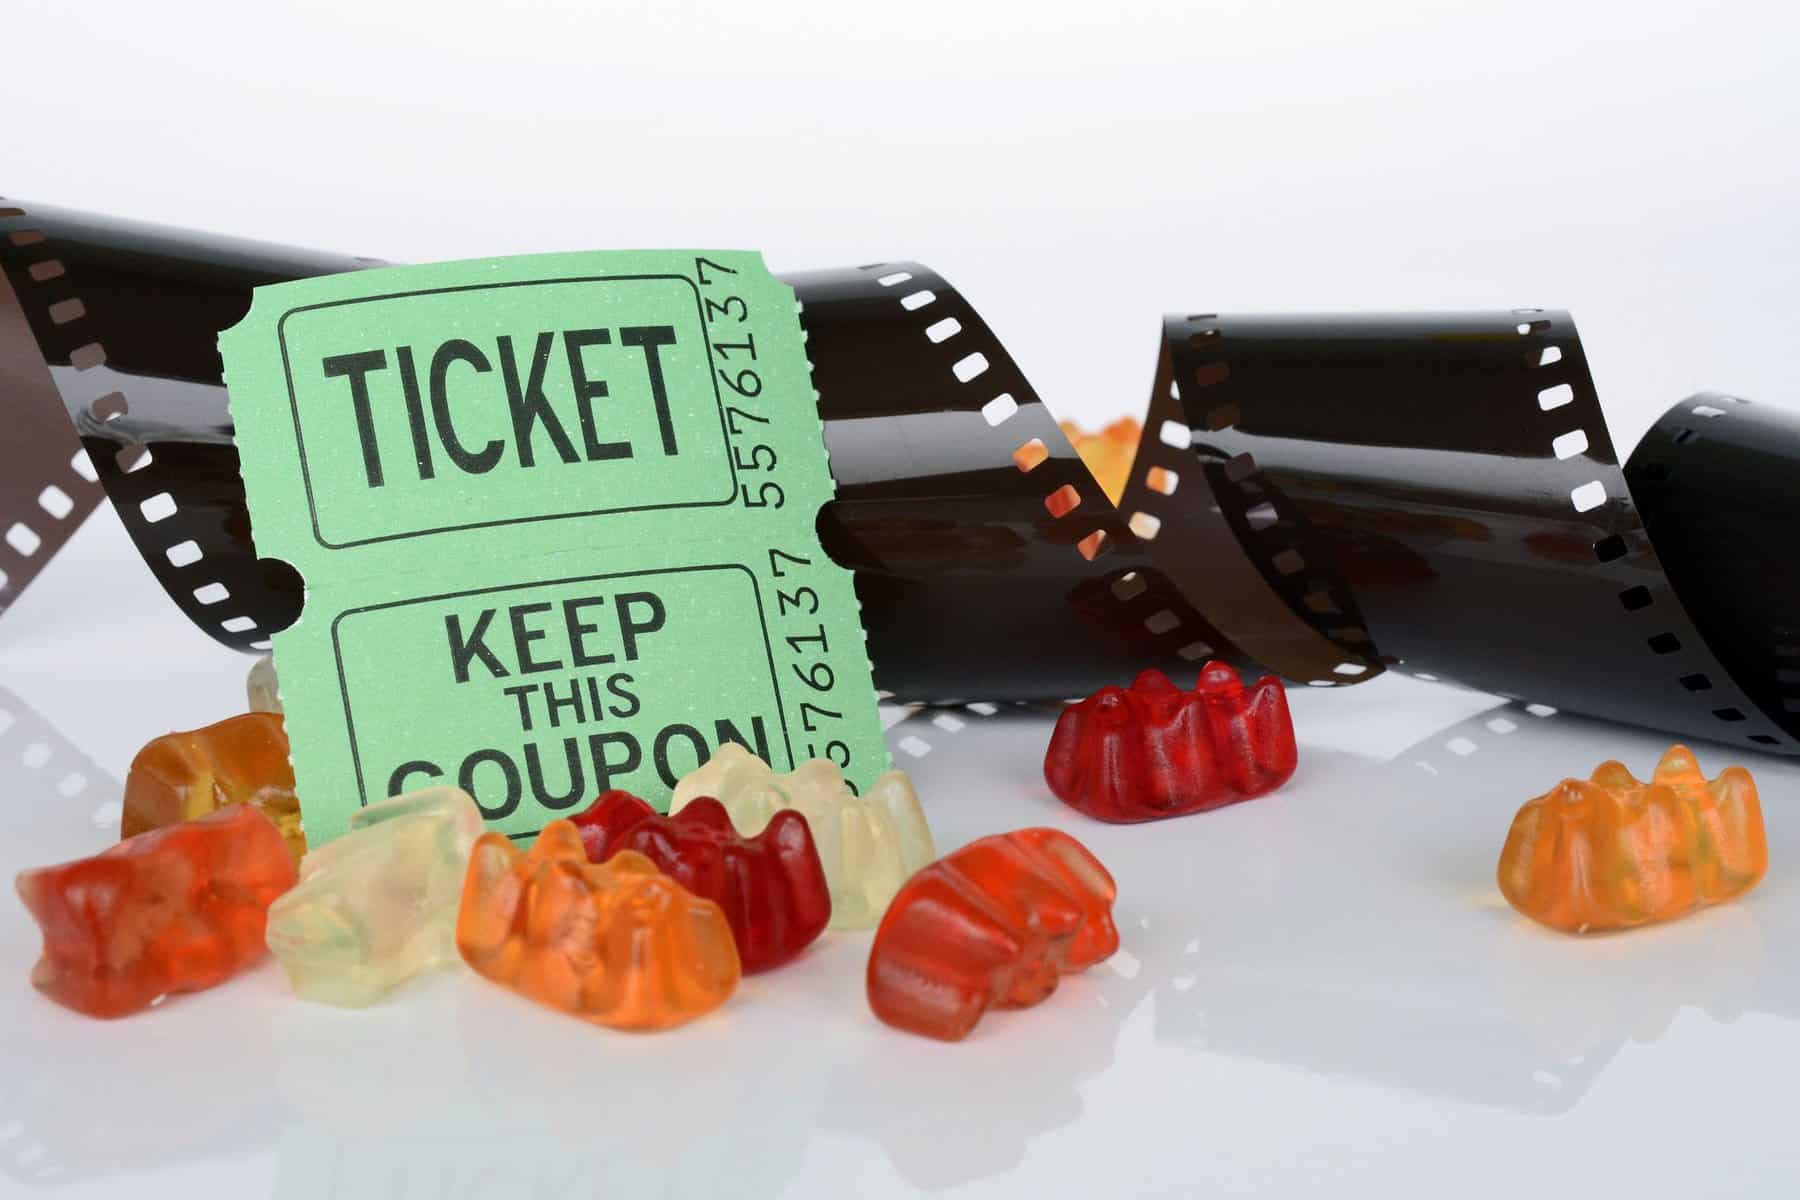 Green ticket stubs are shown on a white surface with a roll of film spiraled behind them and gummy candy in front.